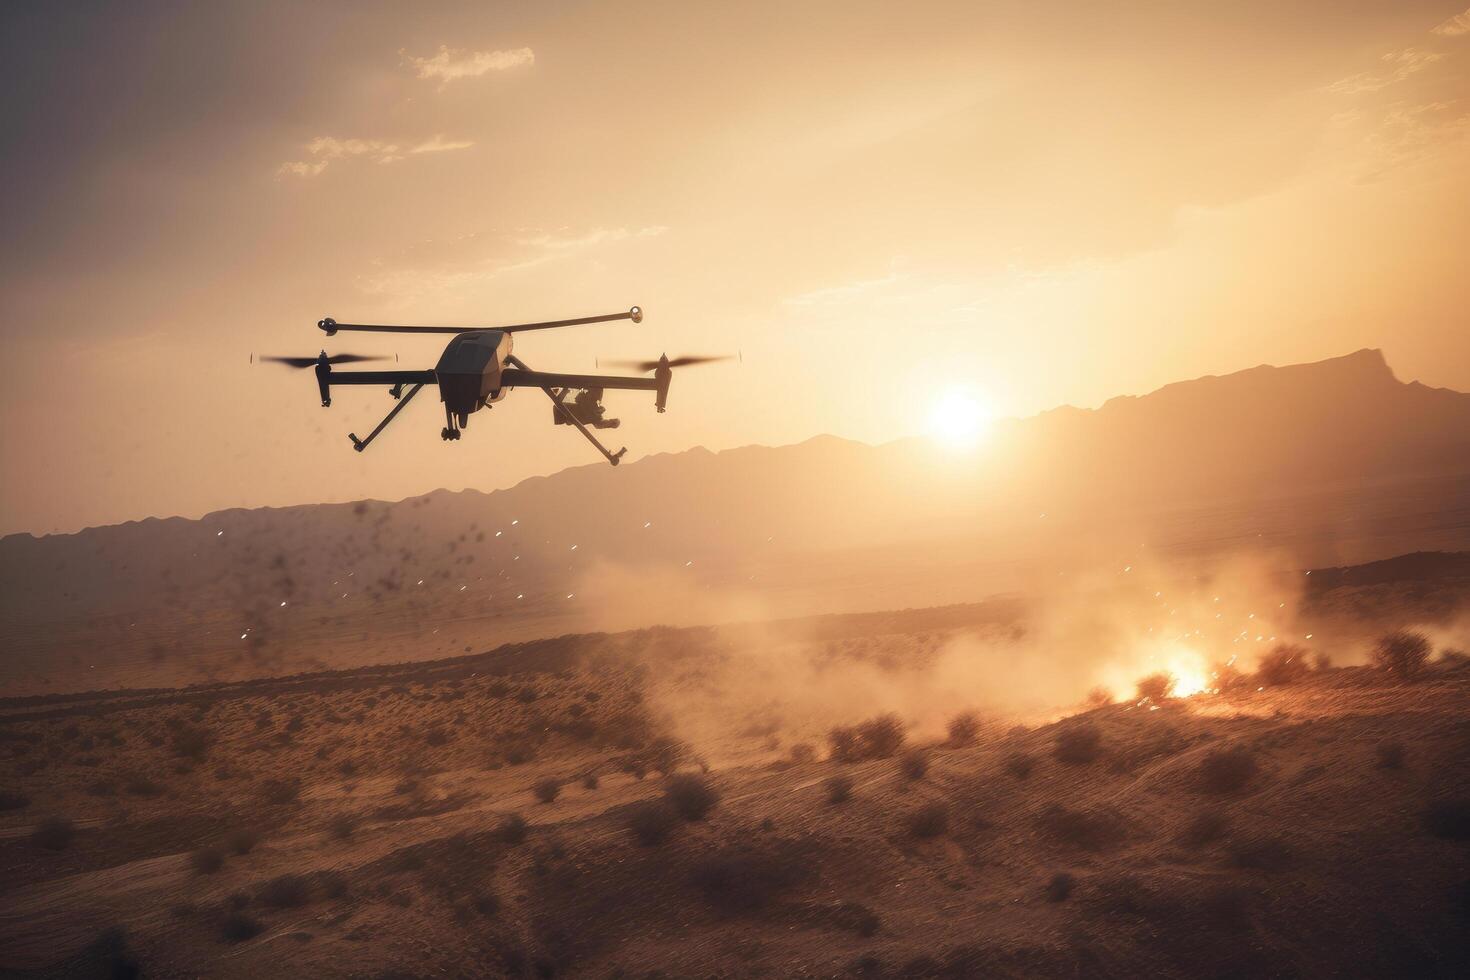 Drone flying in the desert at sunset. 3D Rendering, Military combat UAV drone launching missiles, photo